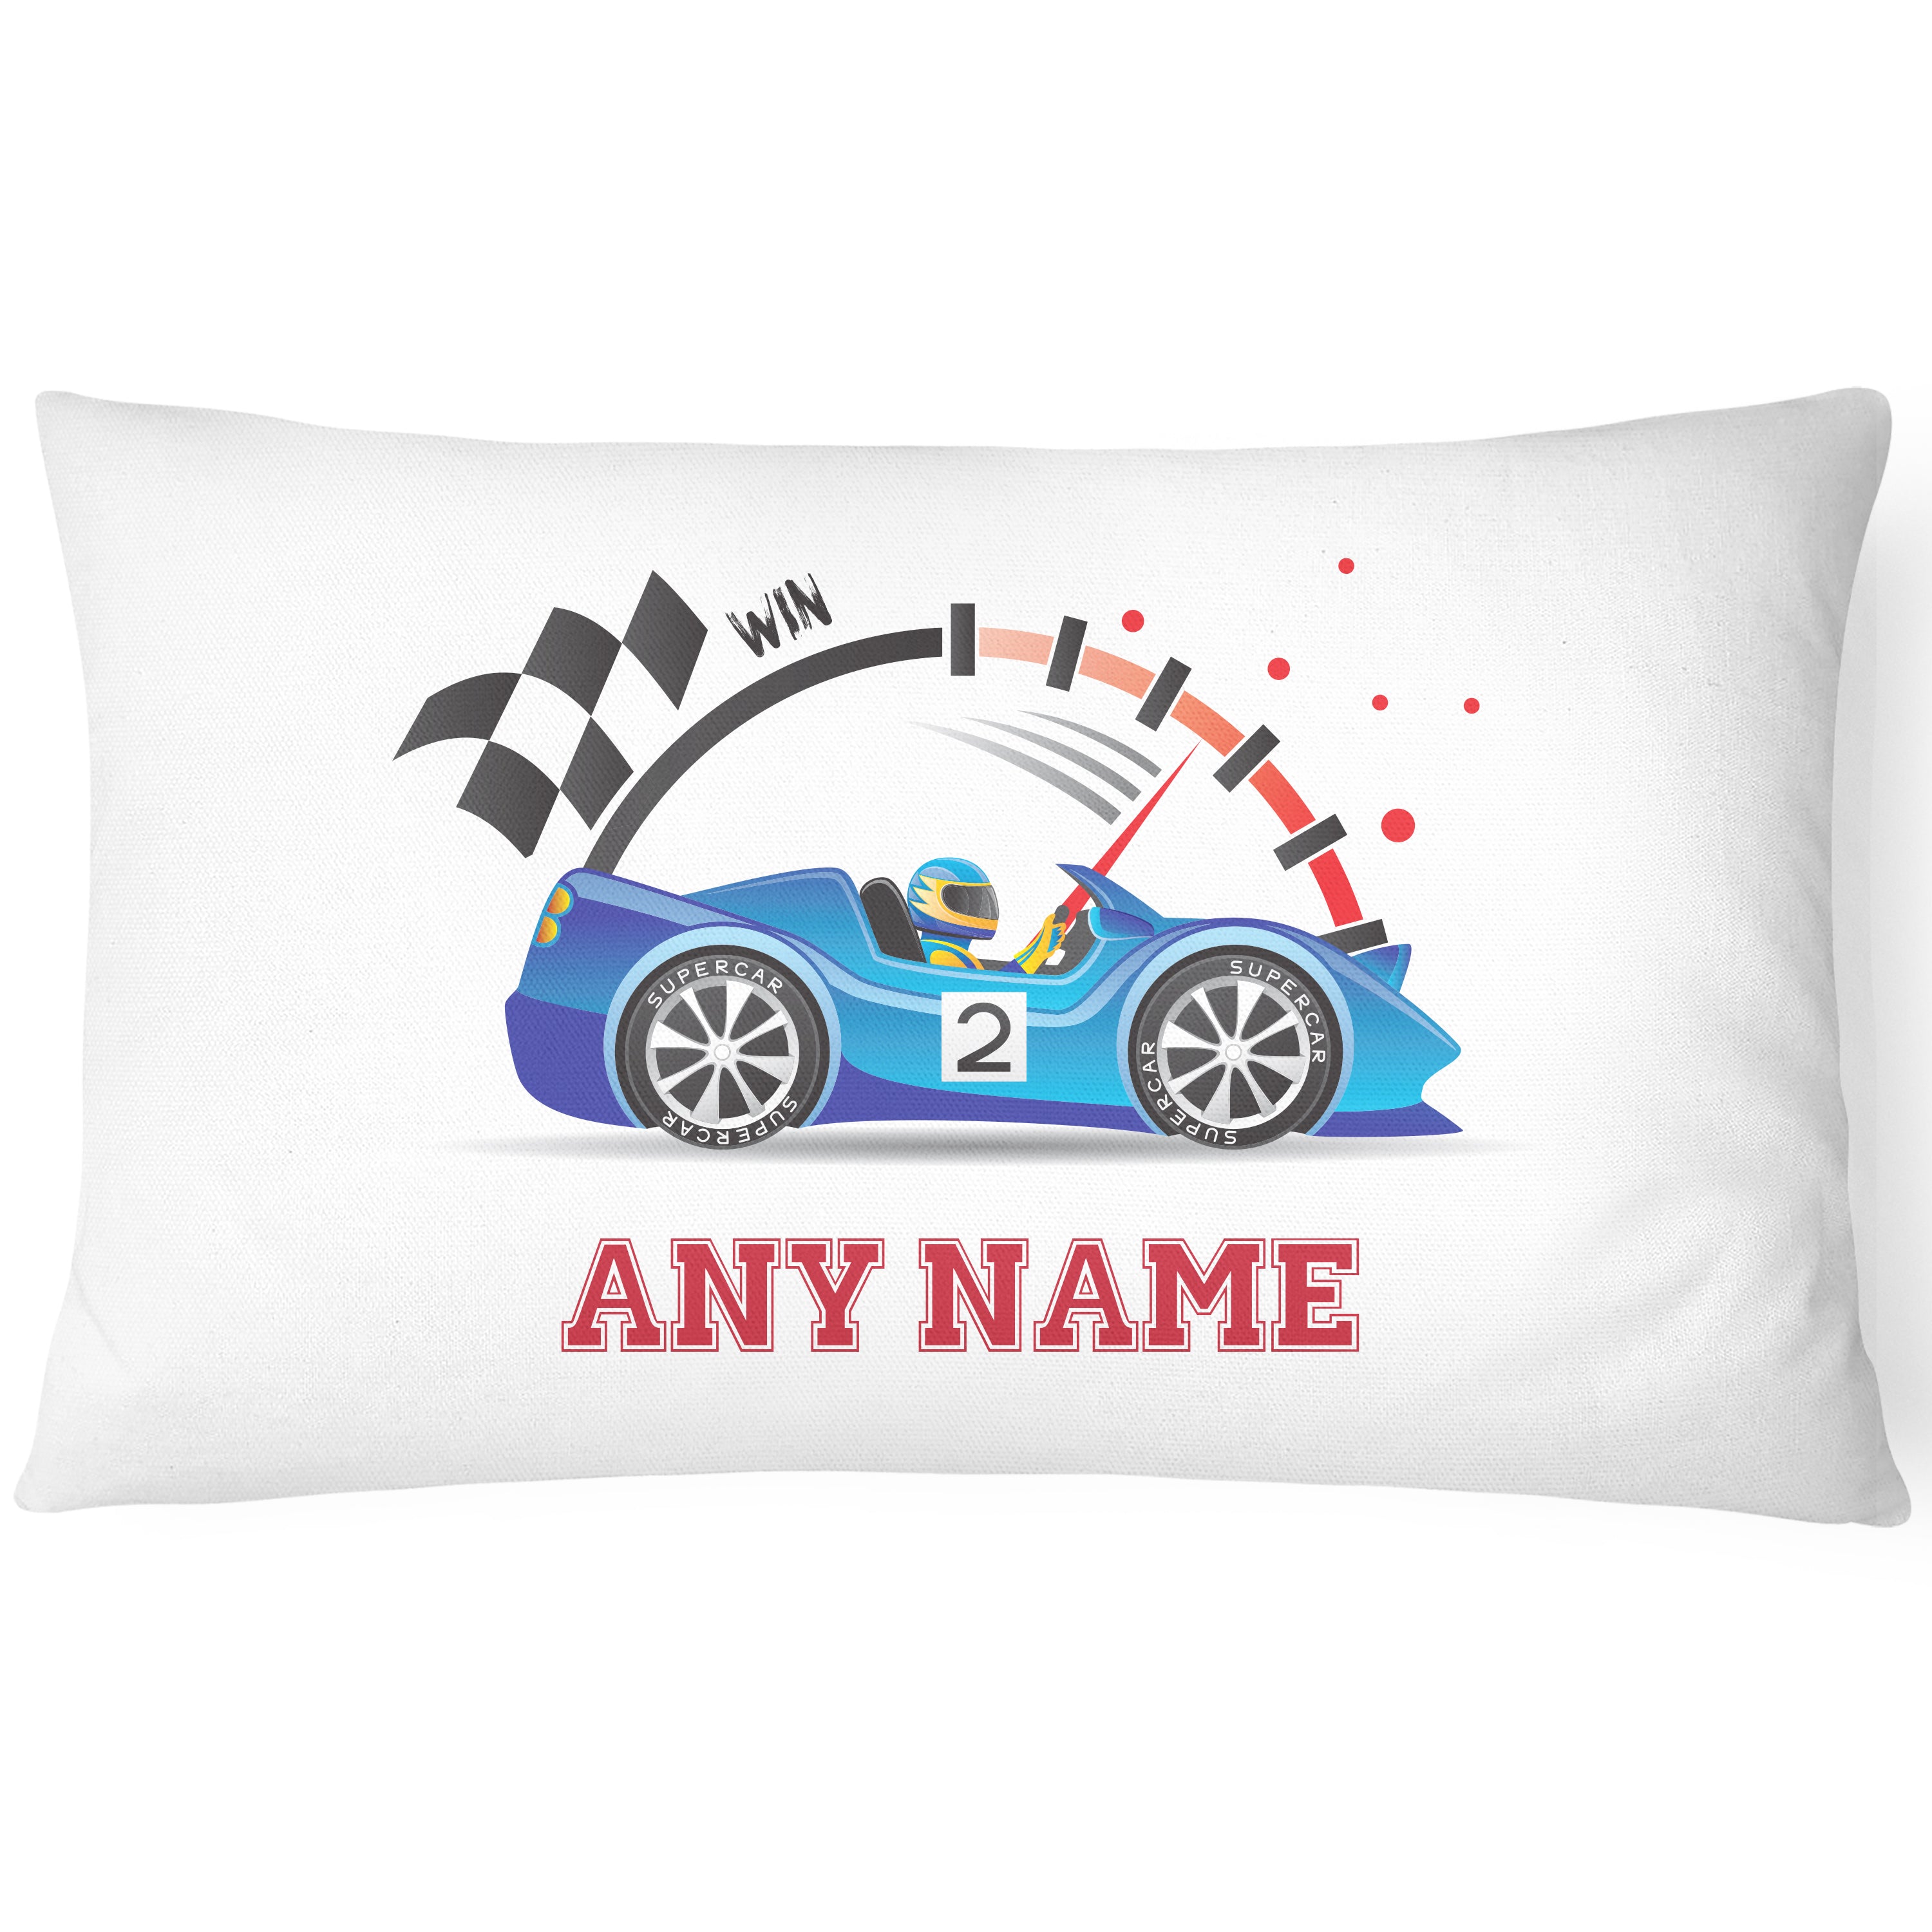 Race Car Pillowcase for Kids - Personalise With Any Name - Perfect Children's Gift - Blue